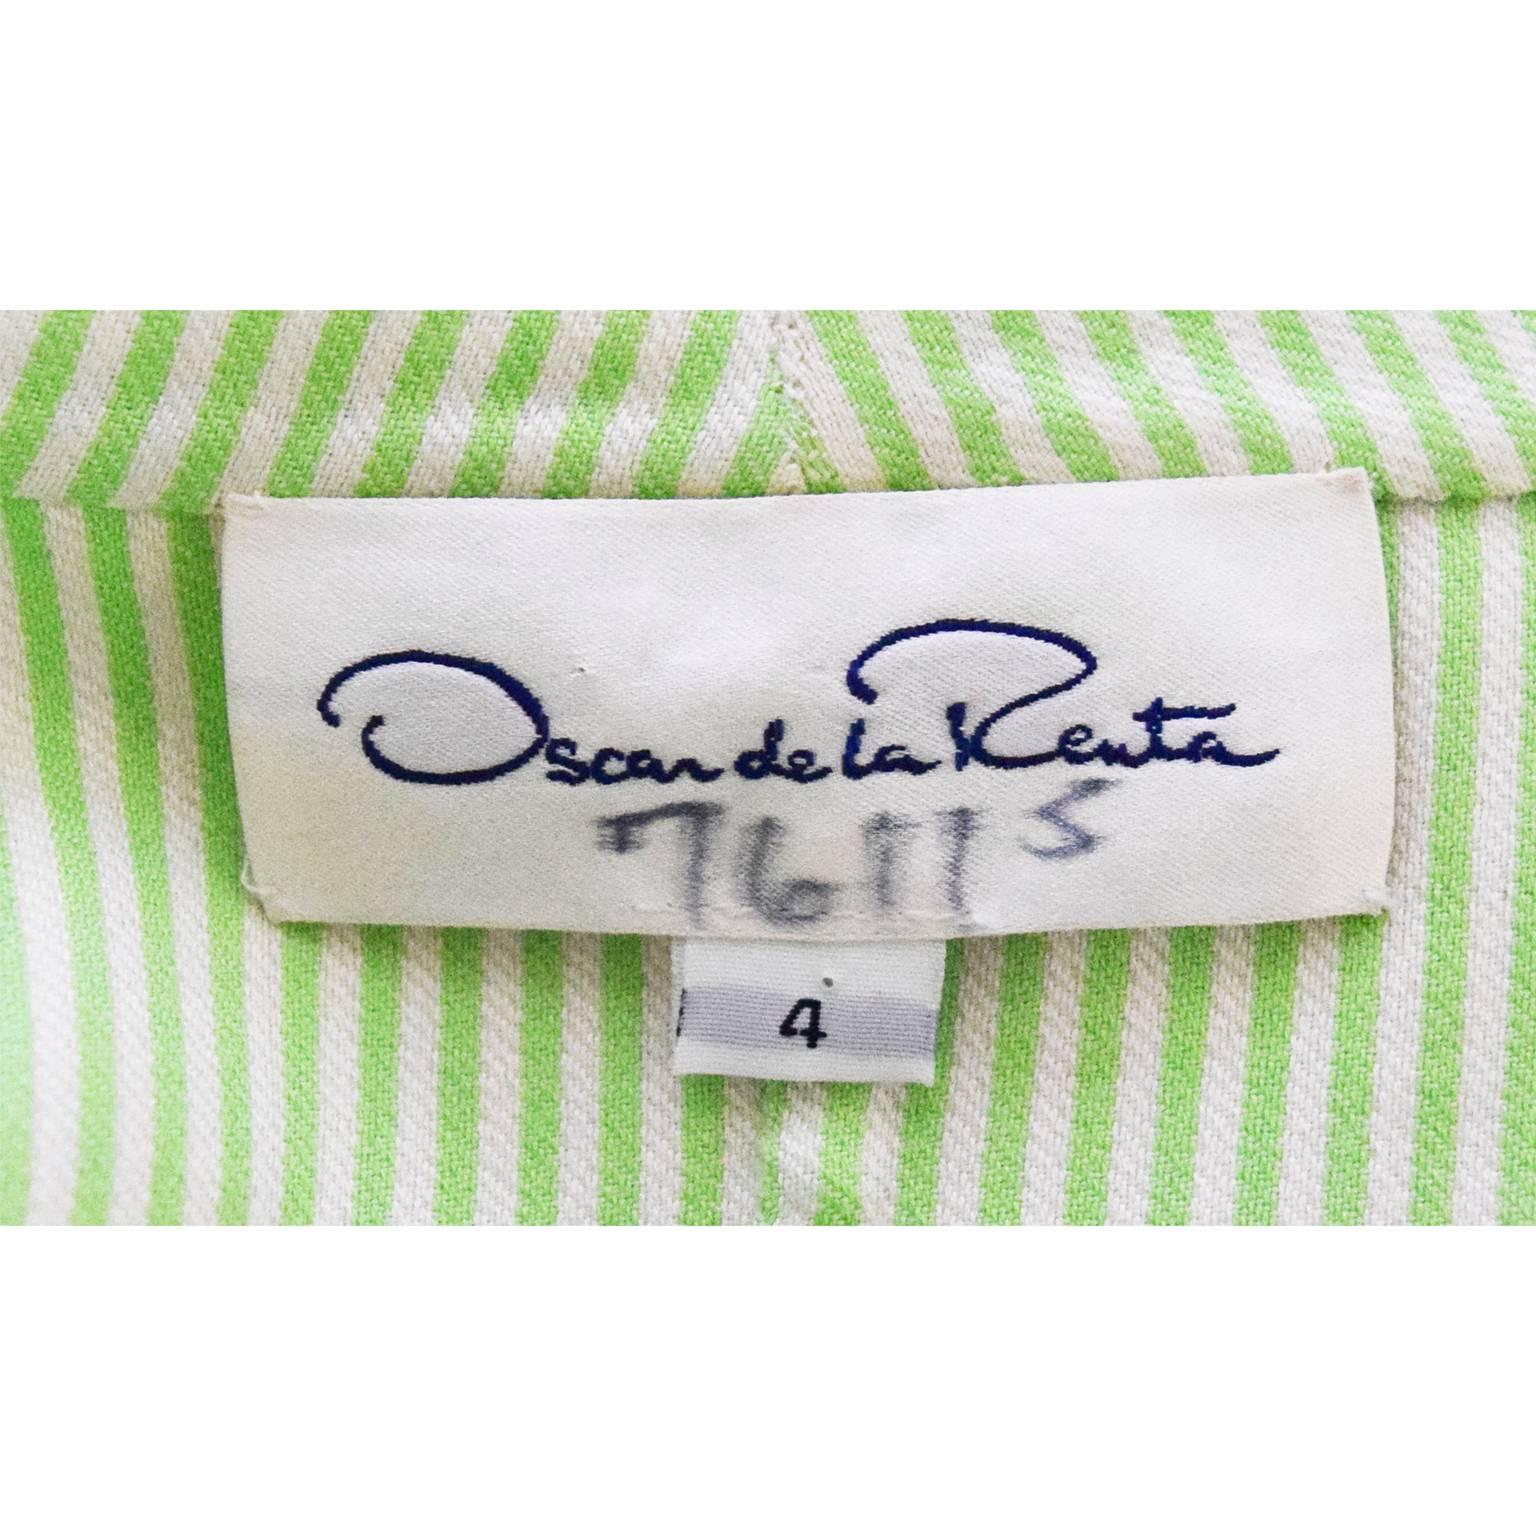 Oscar de la Renta Lime and Ivory Striped Sleeveless Shirt Dress  In Excellent Condition For Sale In Henrico, VA